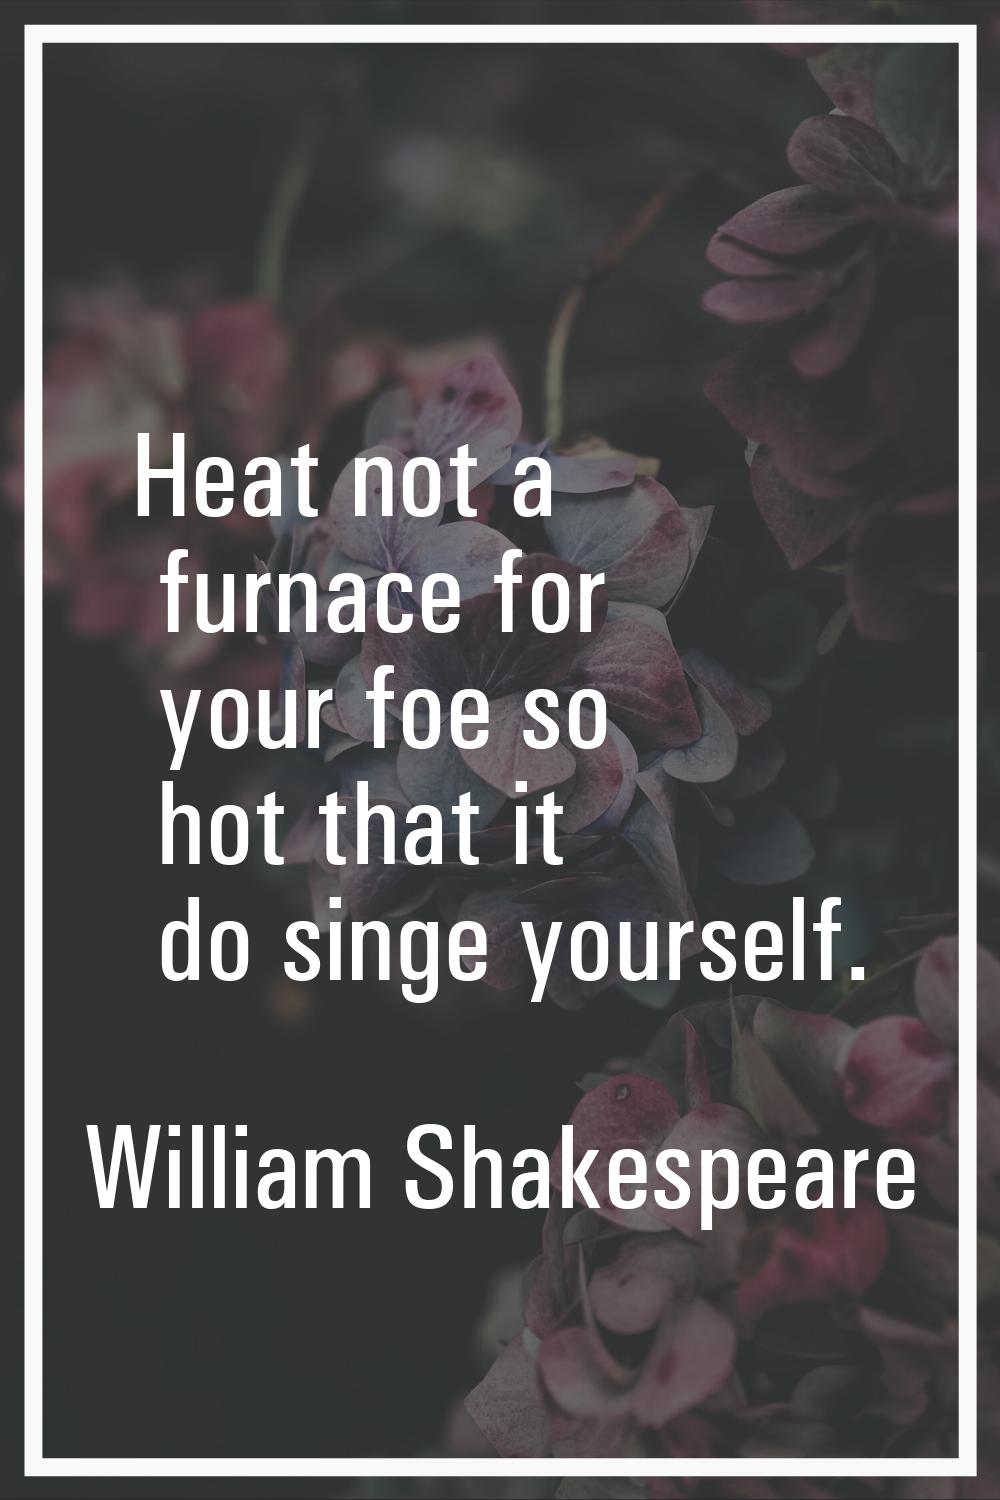 Heat not a furnace for your foe so hot that it do singe yourself.